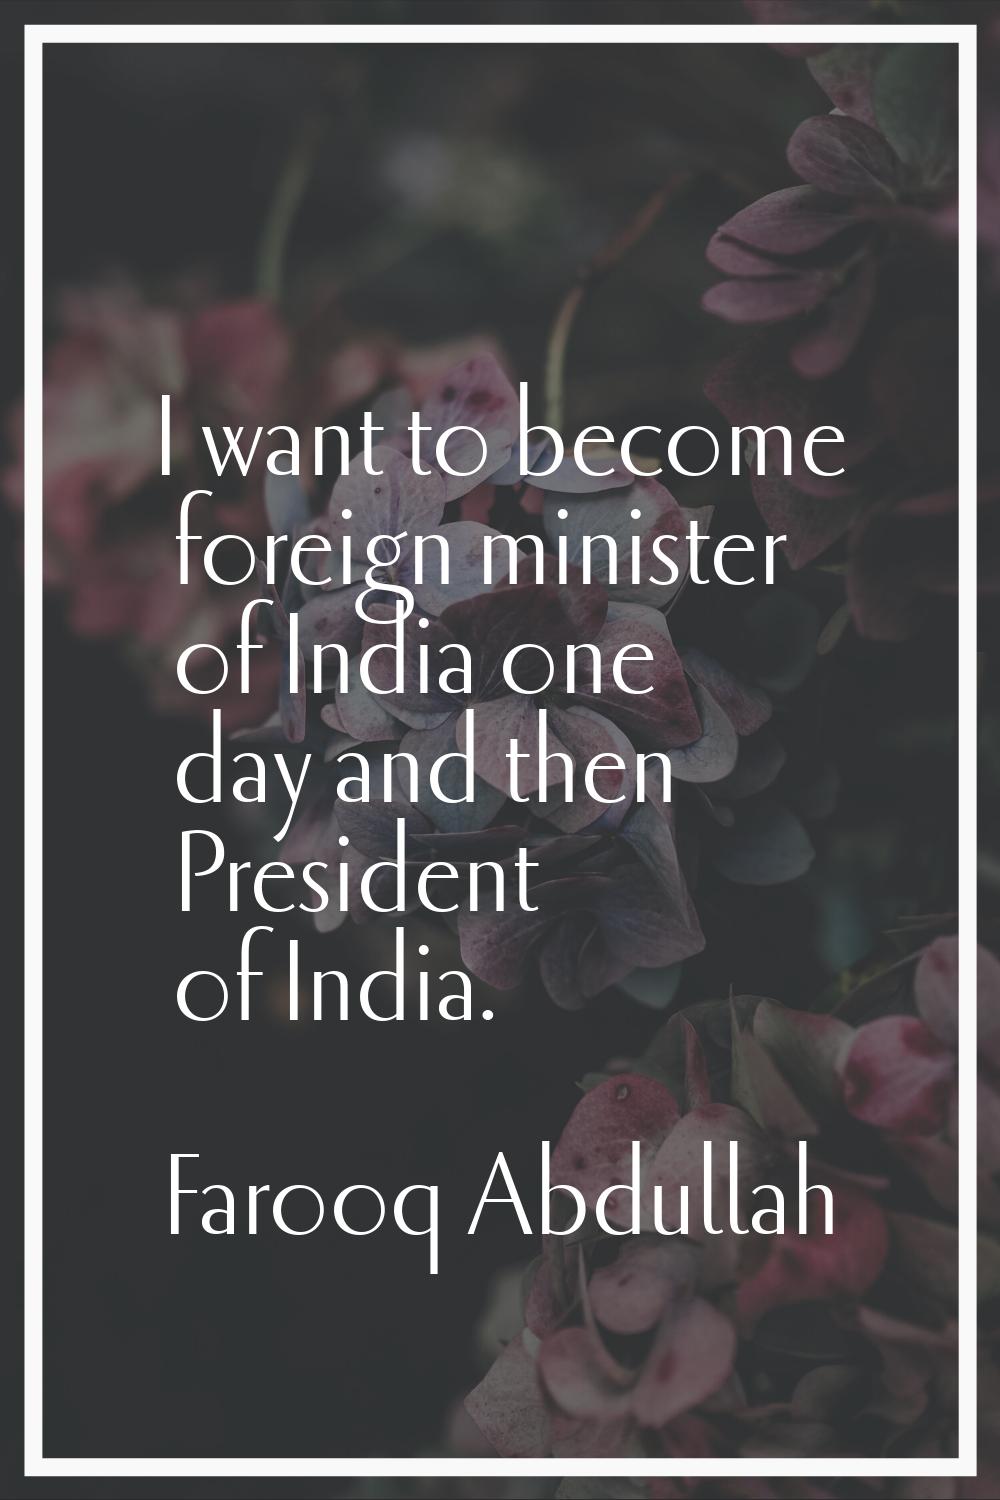 I want to become foreign minister of India one day and then President of India.